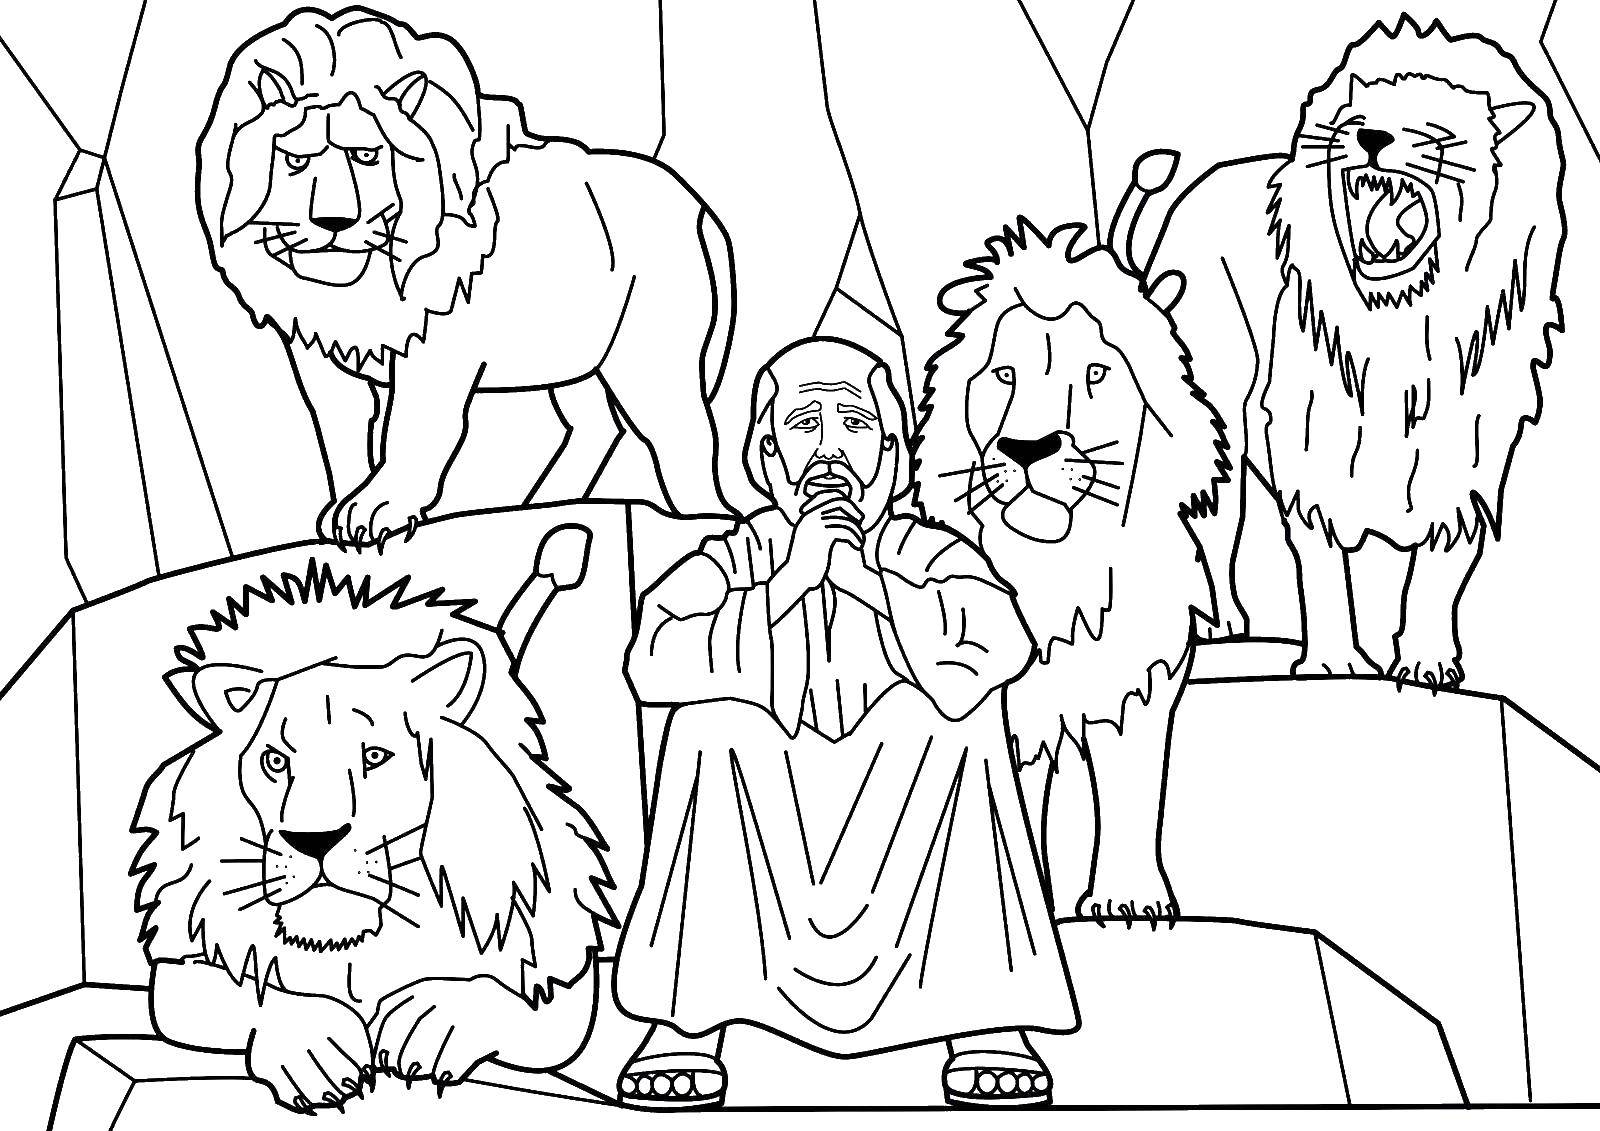 Coloring Daniel and the lions. Category the Bible. Tags:  the Bible, Jesus, Daniel, lions.